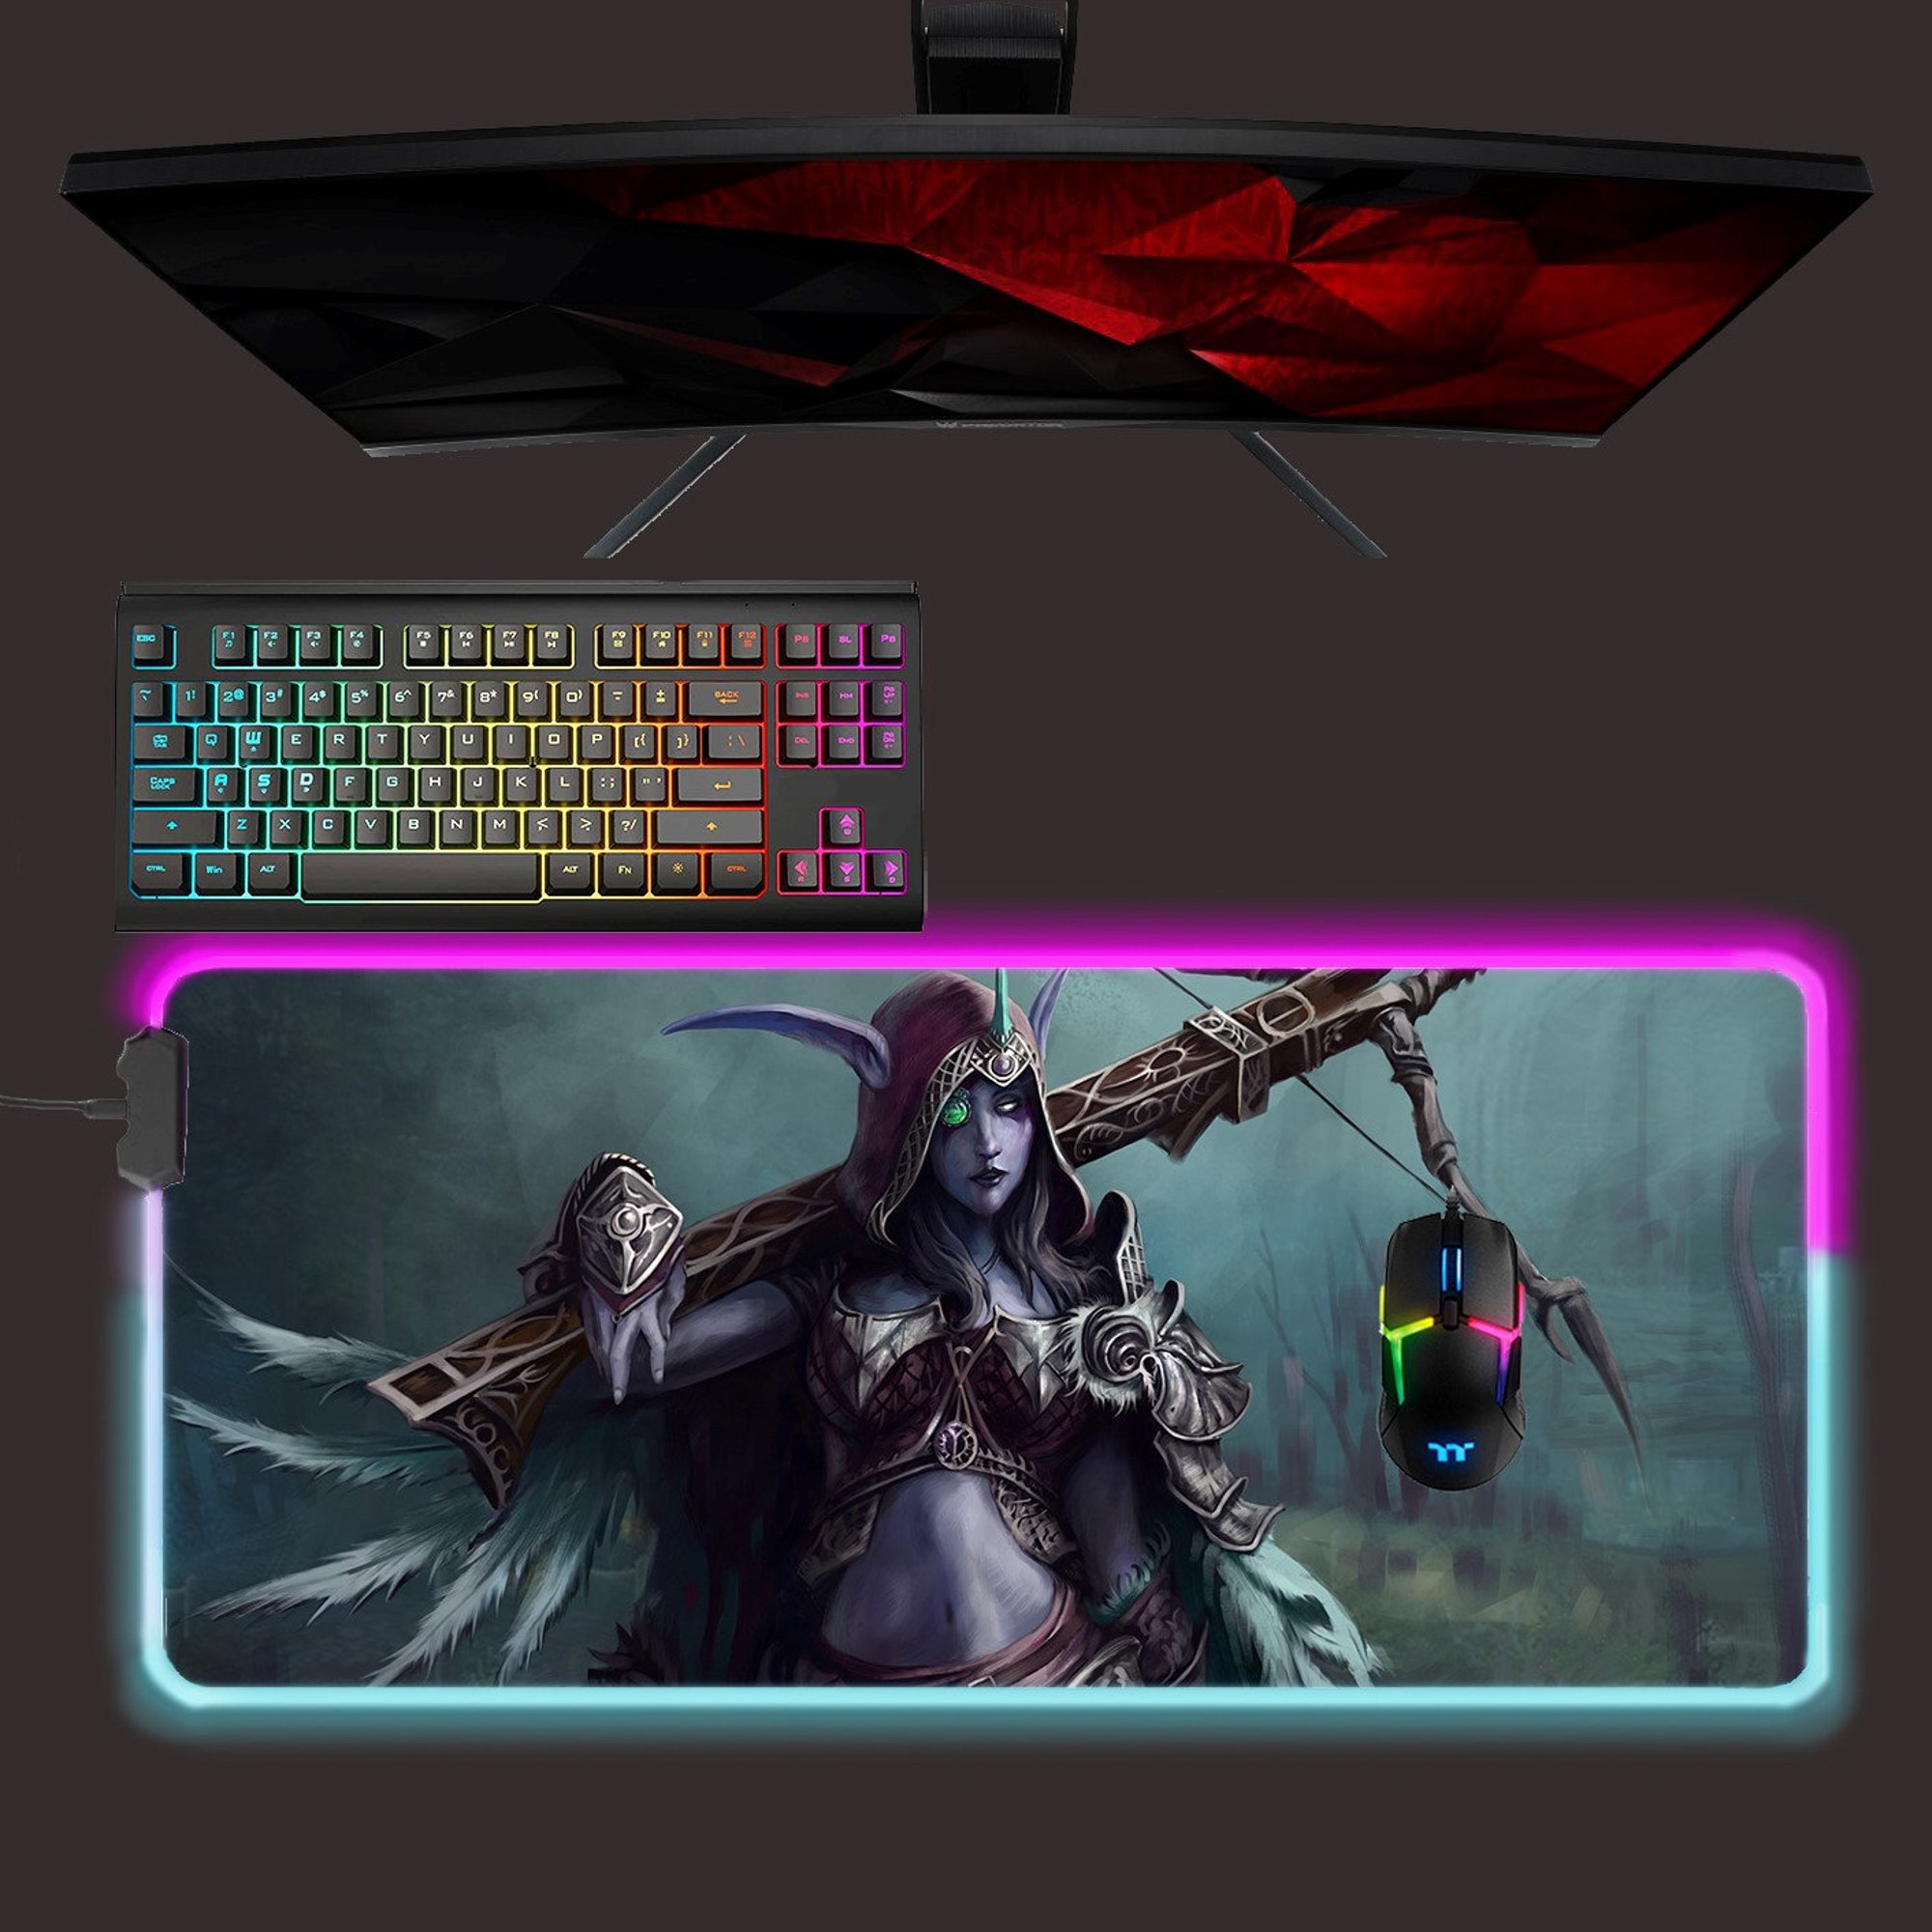 World of Warcraft led mouse mat, WoW Sylvanas rgb mouse pad, gaming mouse pad, desk mat, gift for gamer